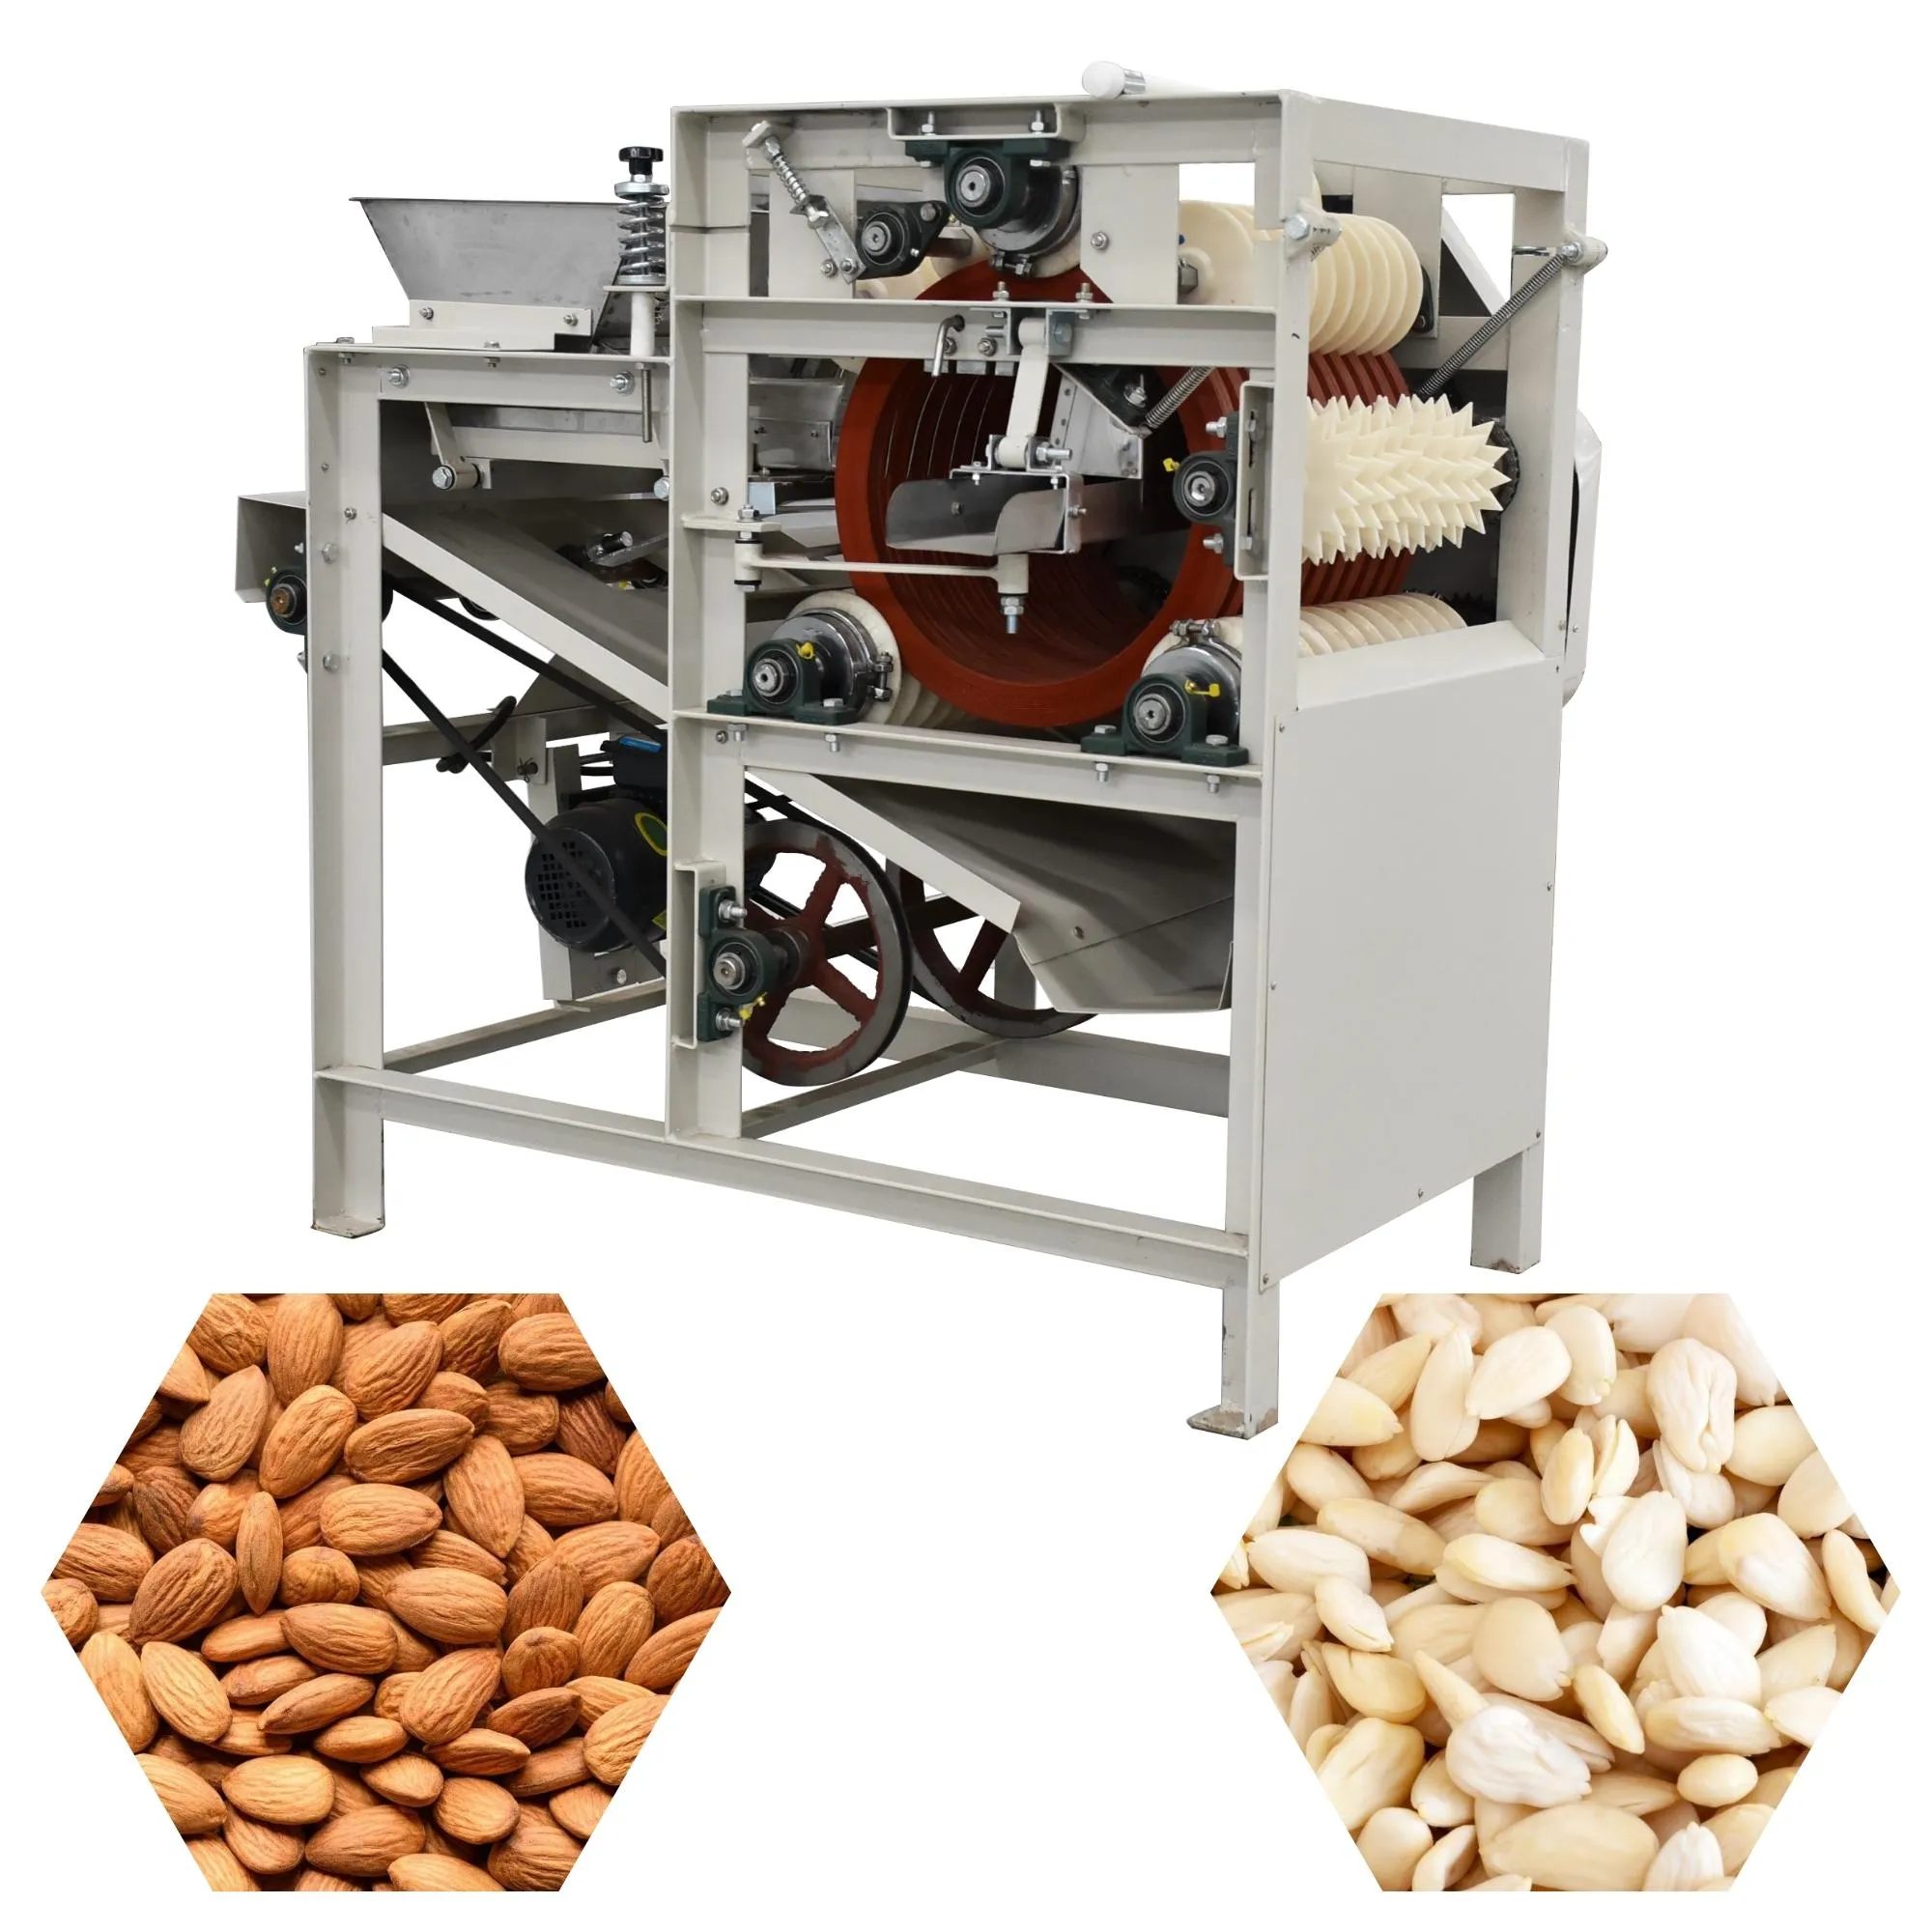 Wet Type Almond Peeling Machine  Compact Nut Peeling Machine Suitable for  Almonds Peanuts and Other Nuts